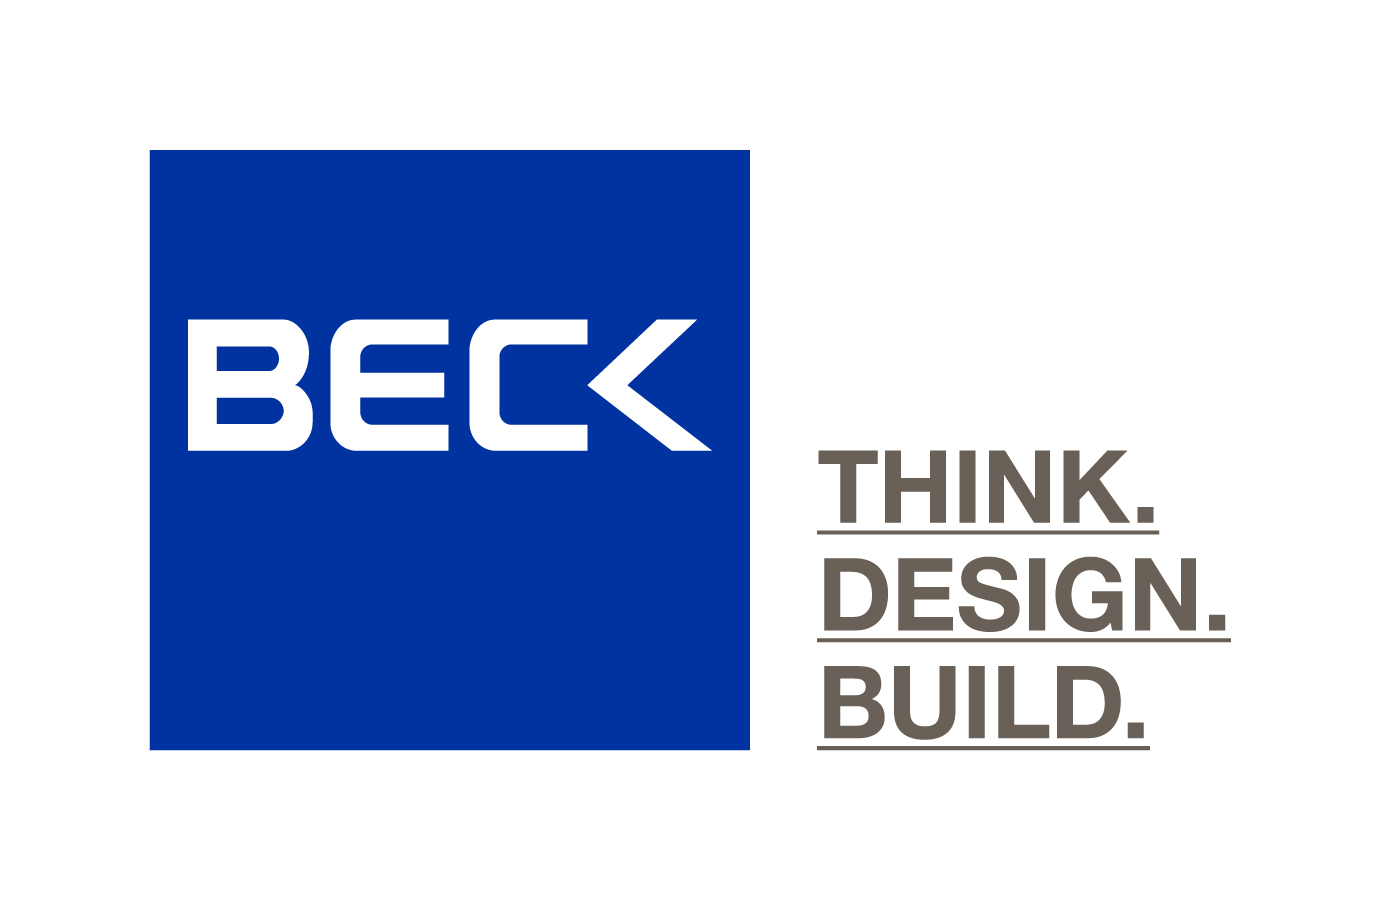 The Beck Group